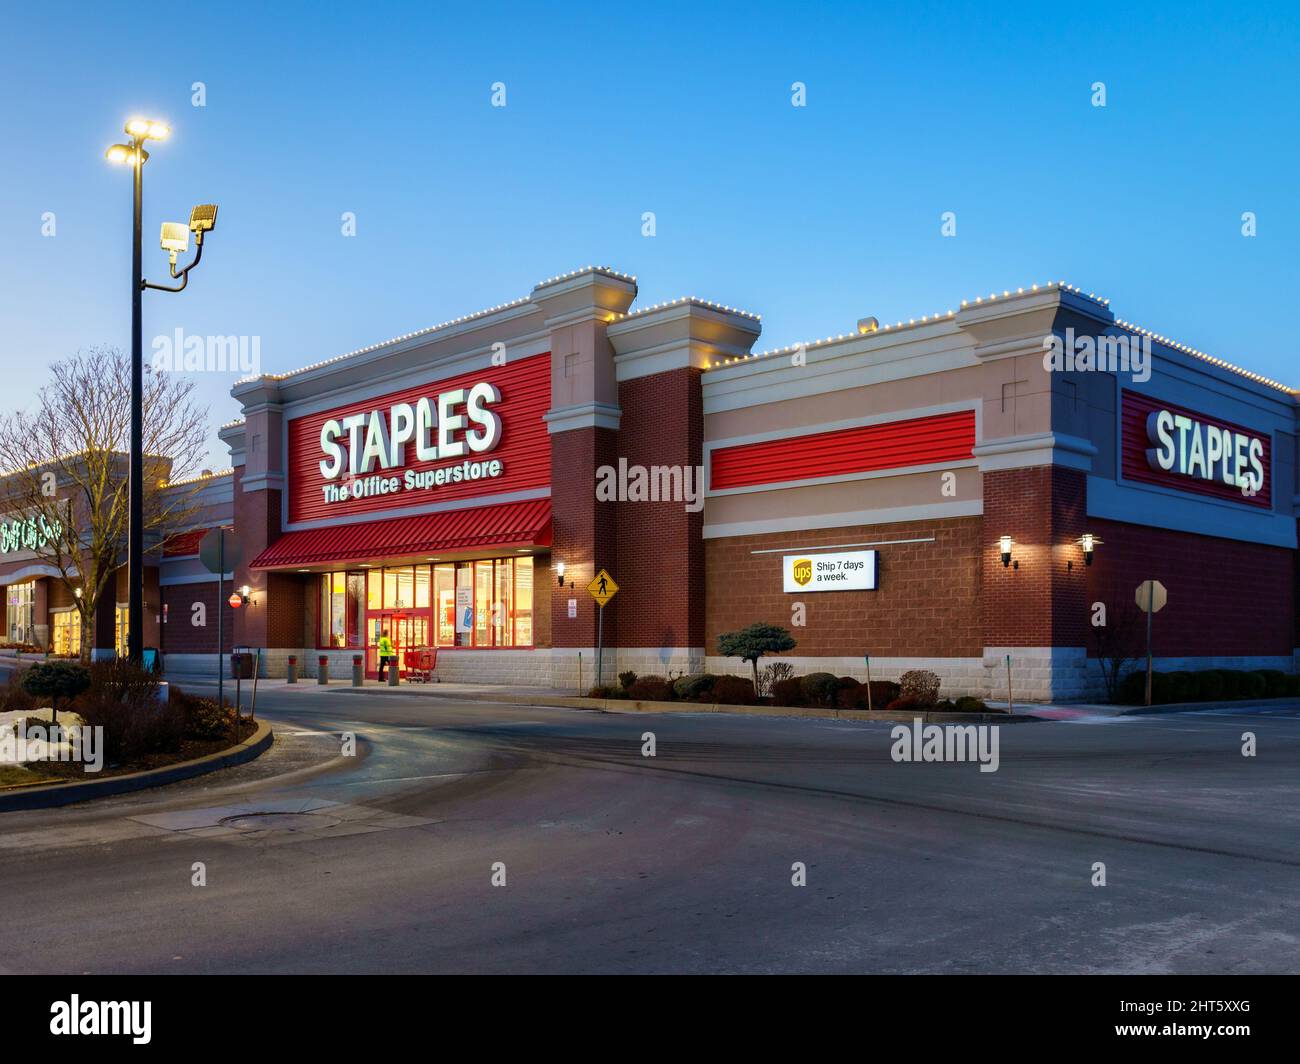 New Hartford, New York - Feb 24, 2022: Closeup Night View of Staples The Office Superstore Building Exterior. Staples Inc. is a US Office Retailer Stock Photo